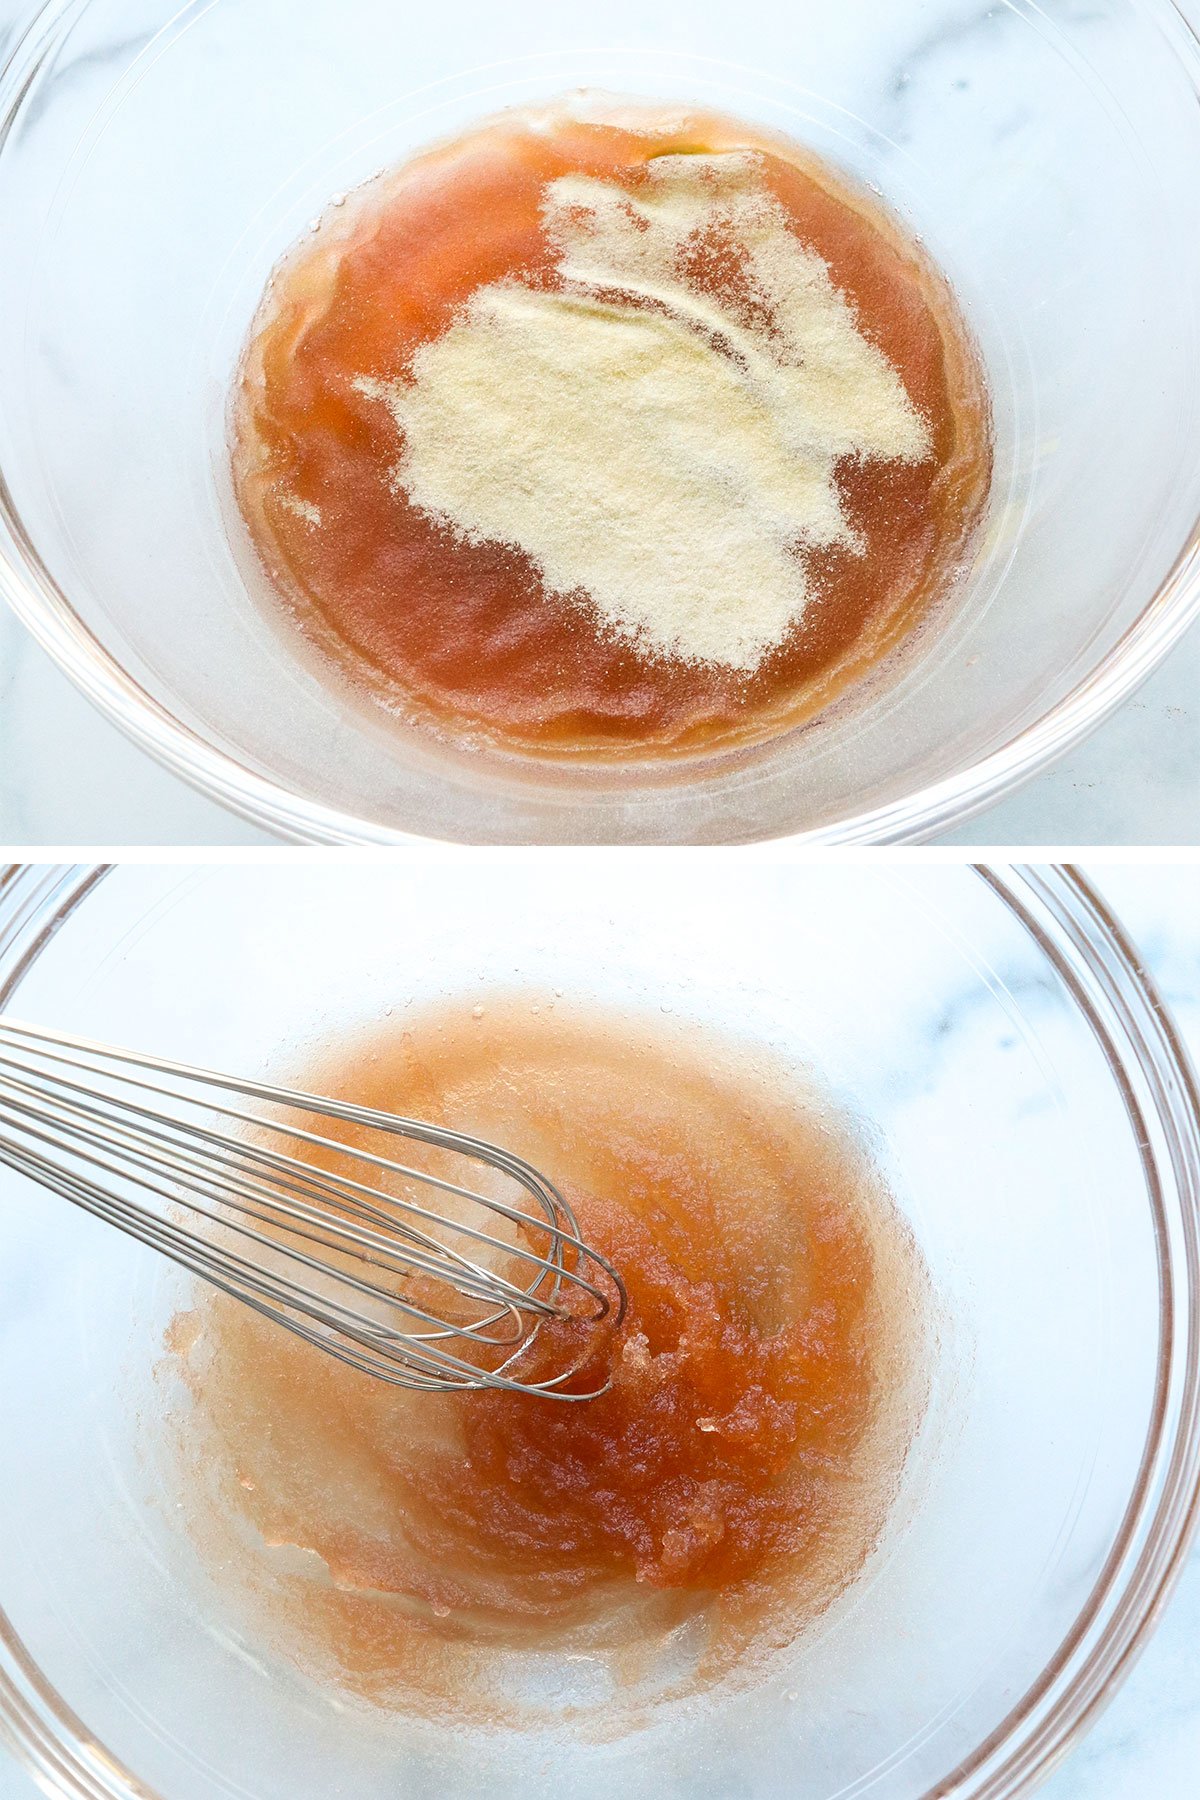 gelatin and fruit juice bloomed in a bowl with whisk.